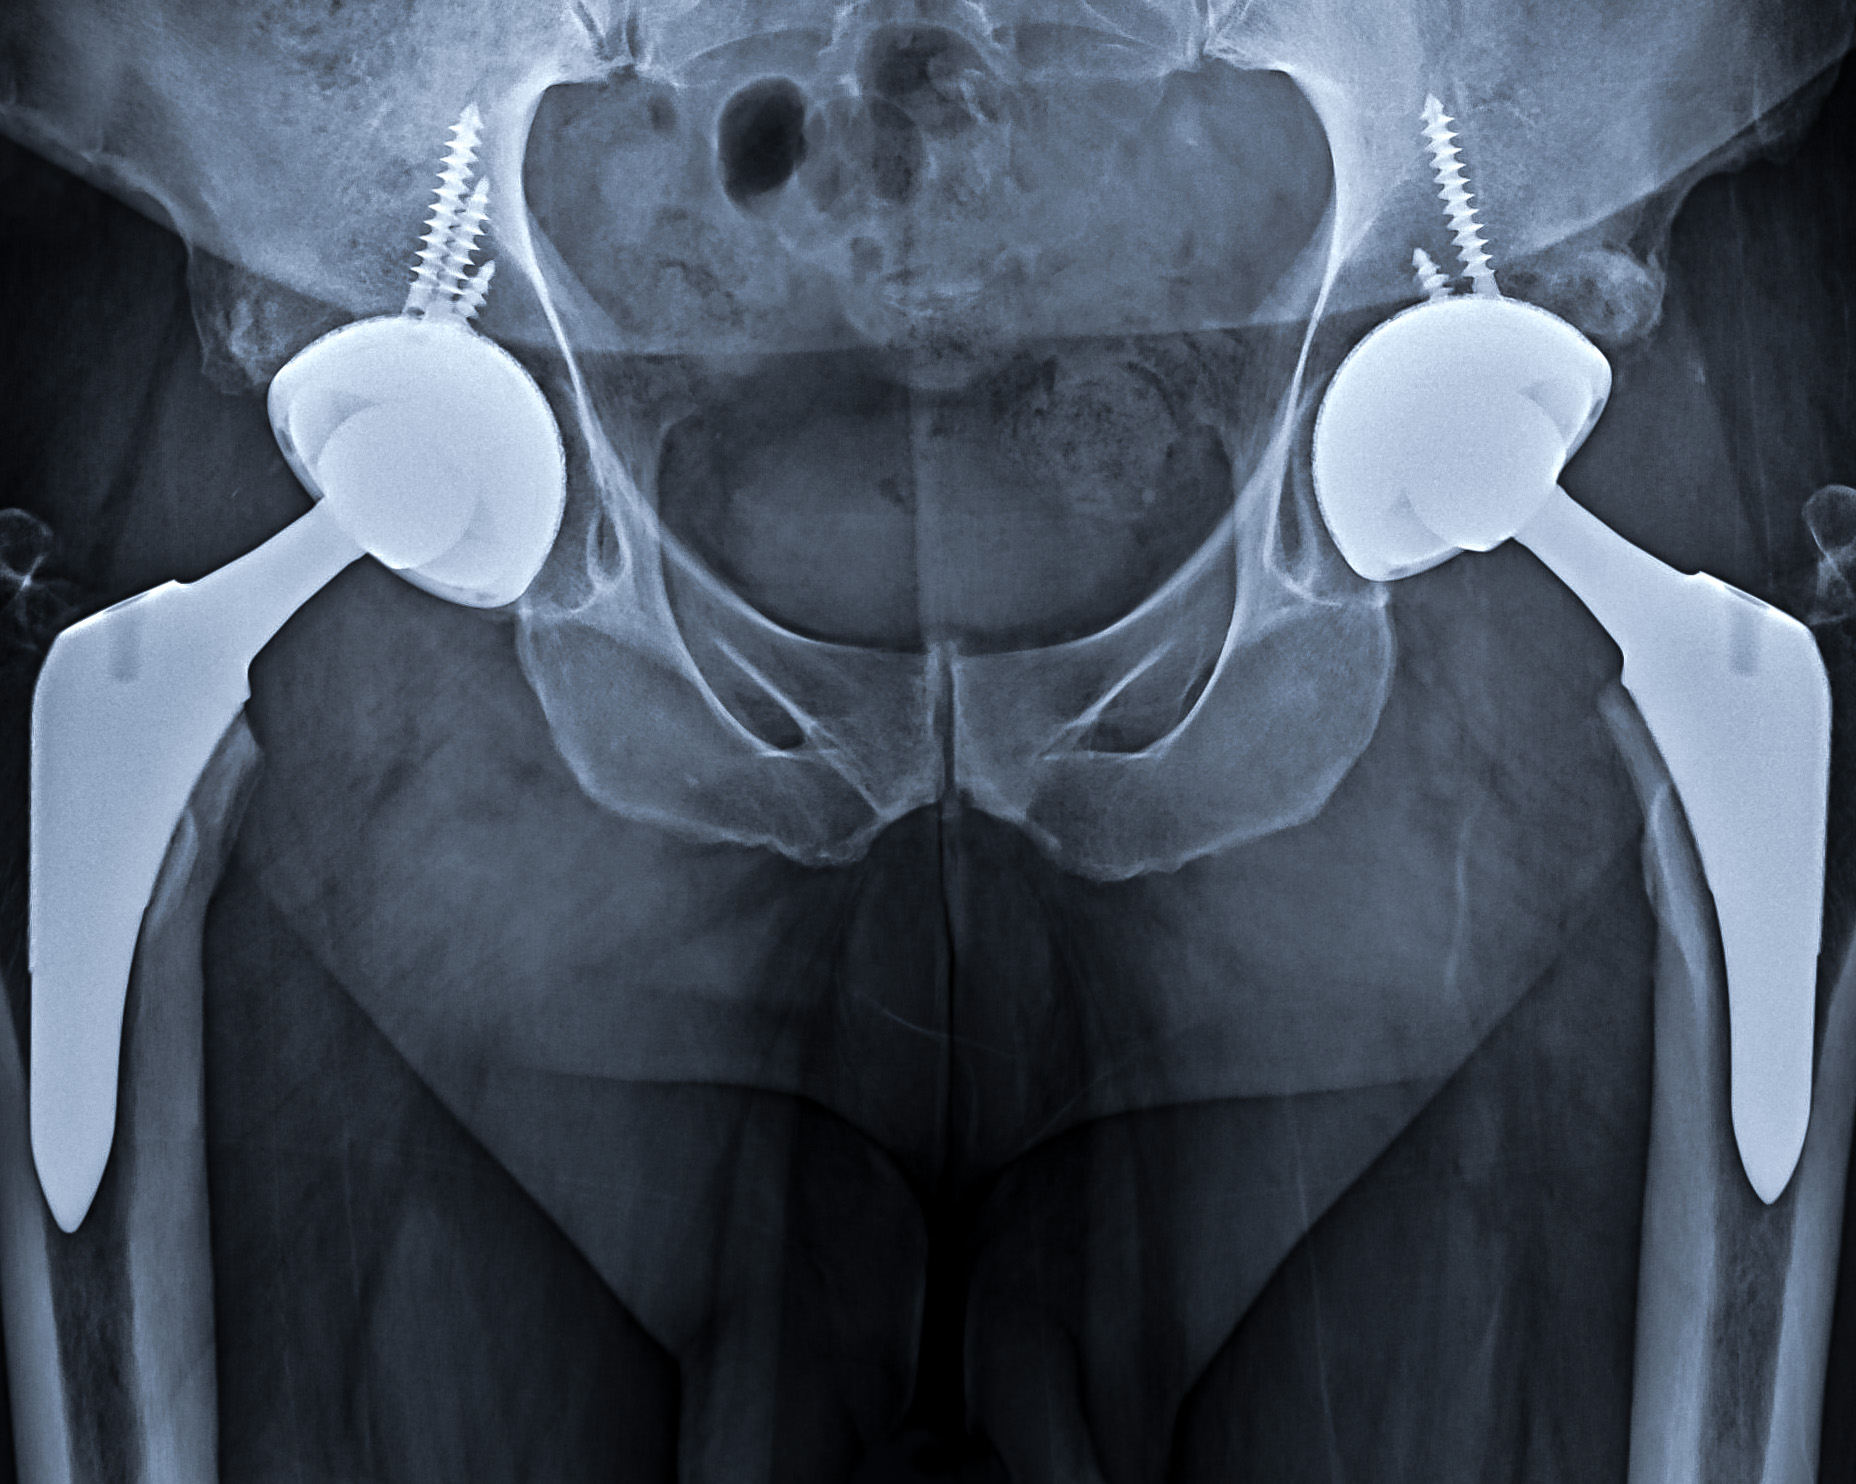 Total Hip Replacement Parts